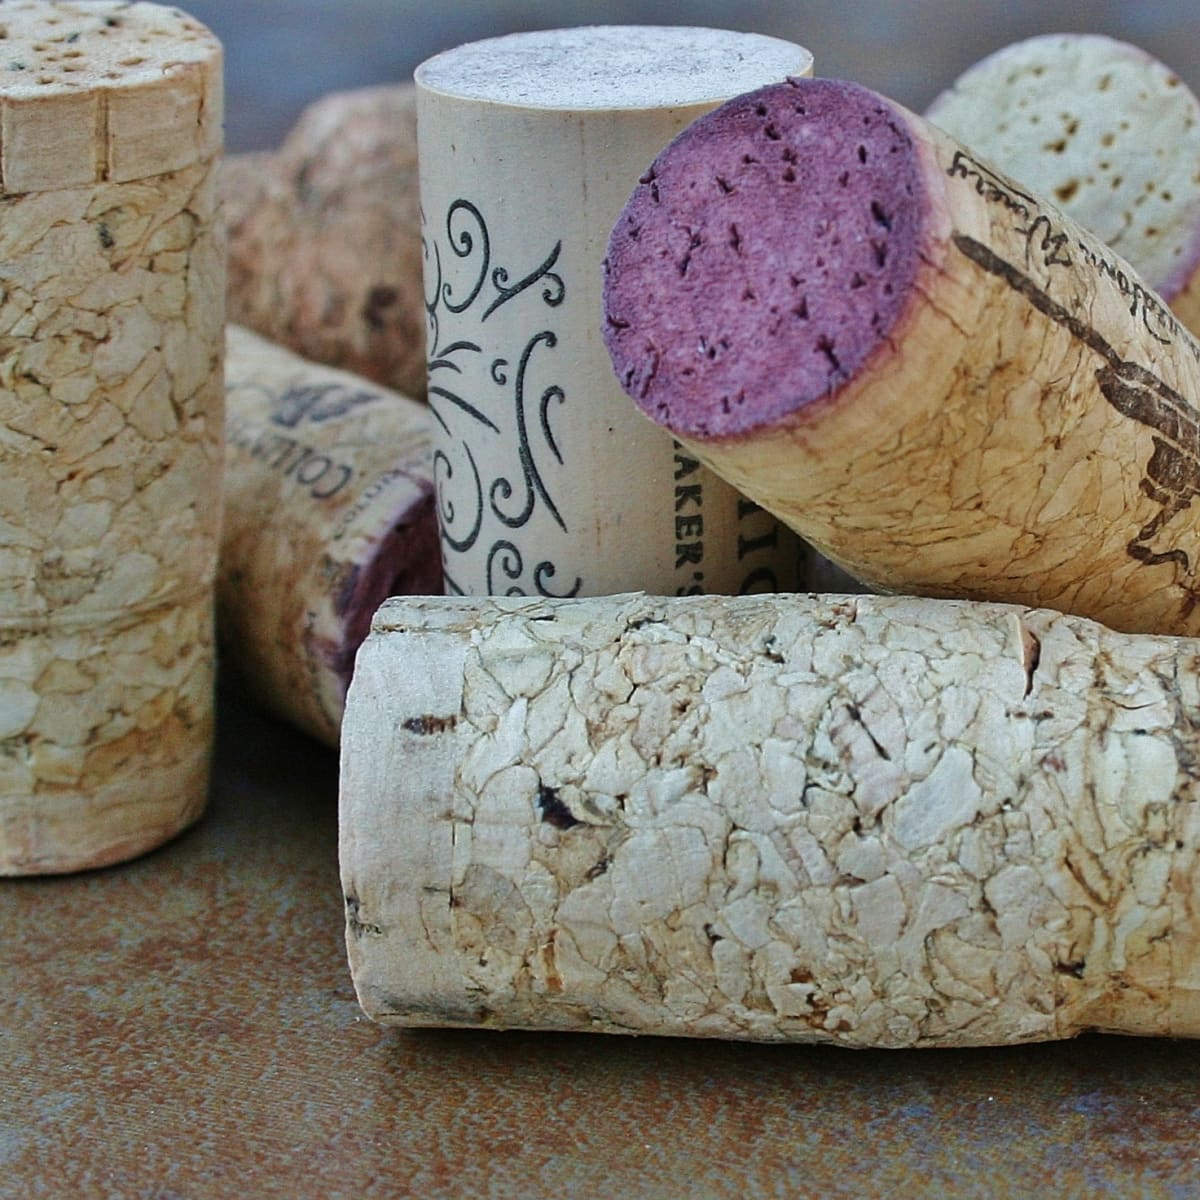 How To Make Wine Cork Crafts For Kids?